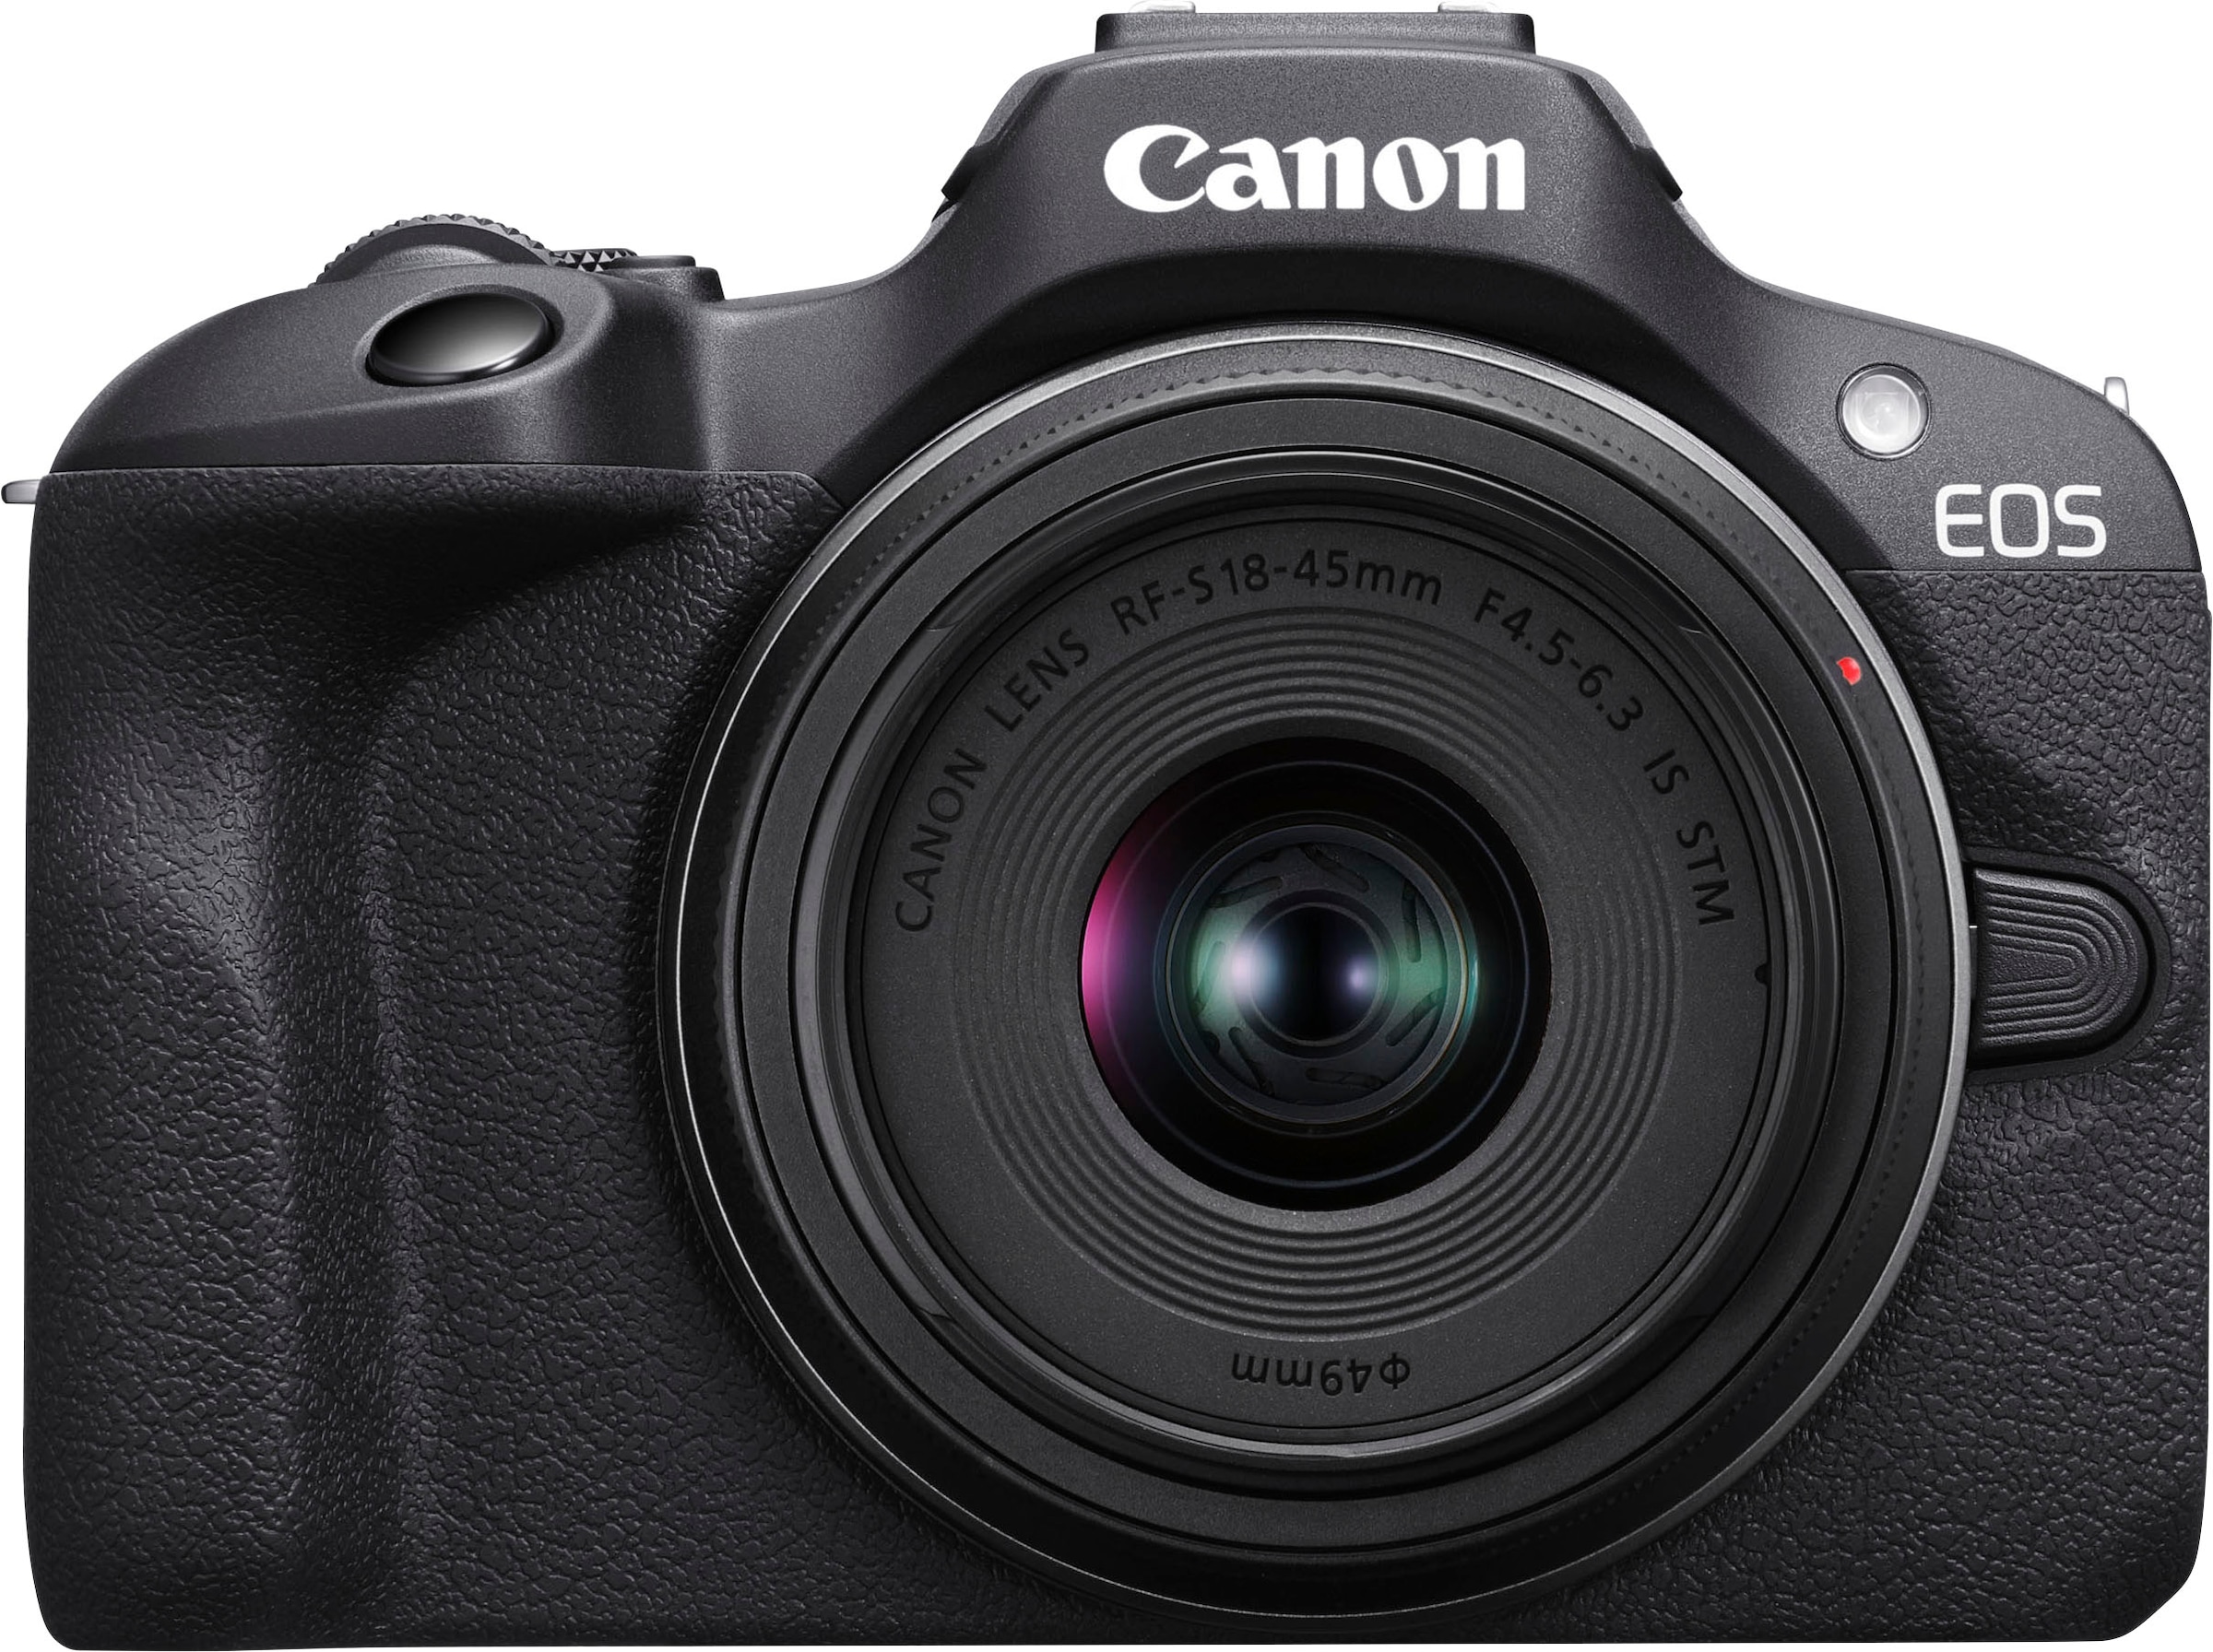 Canon Systemkamera »EOS R100 + 24,1 bei MP, STM, 18-45mm IS IS F4.5-6.3 STM RF-S 18-45mm RF-S Bluetooth-WLAN F4.5-6.3 Kit«